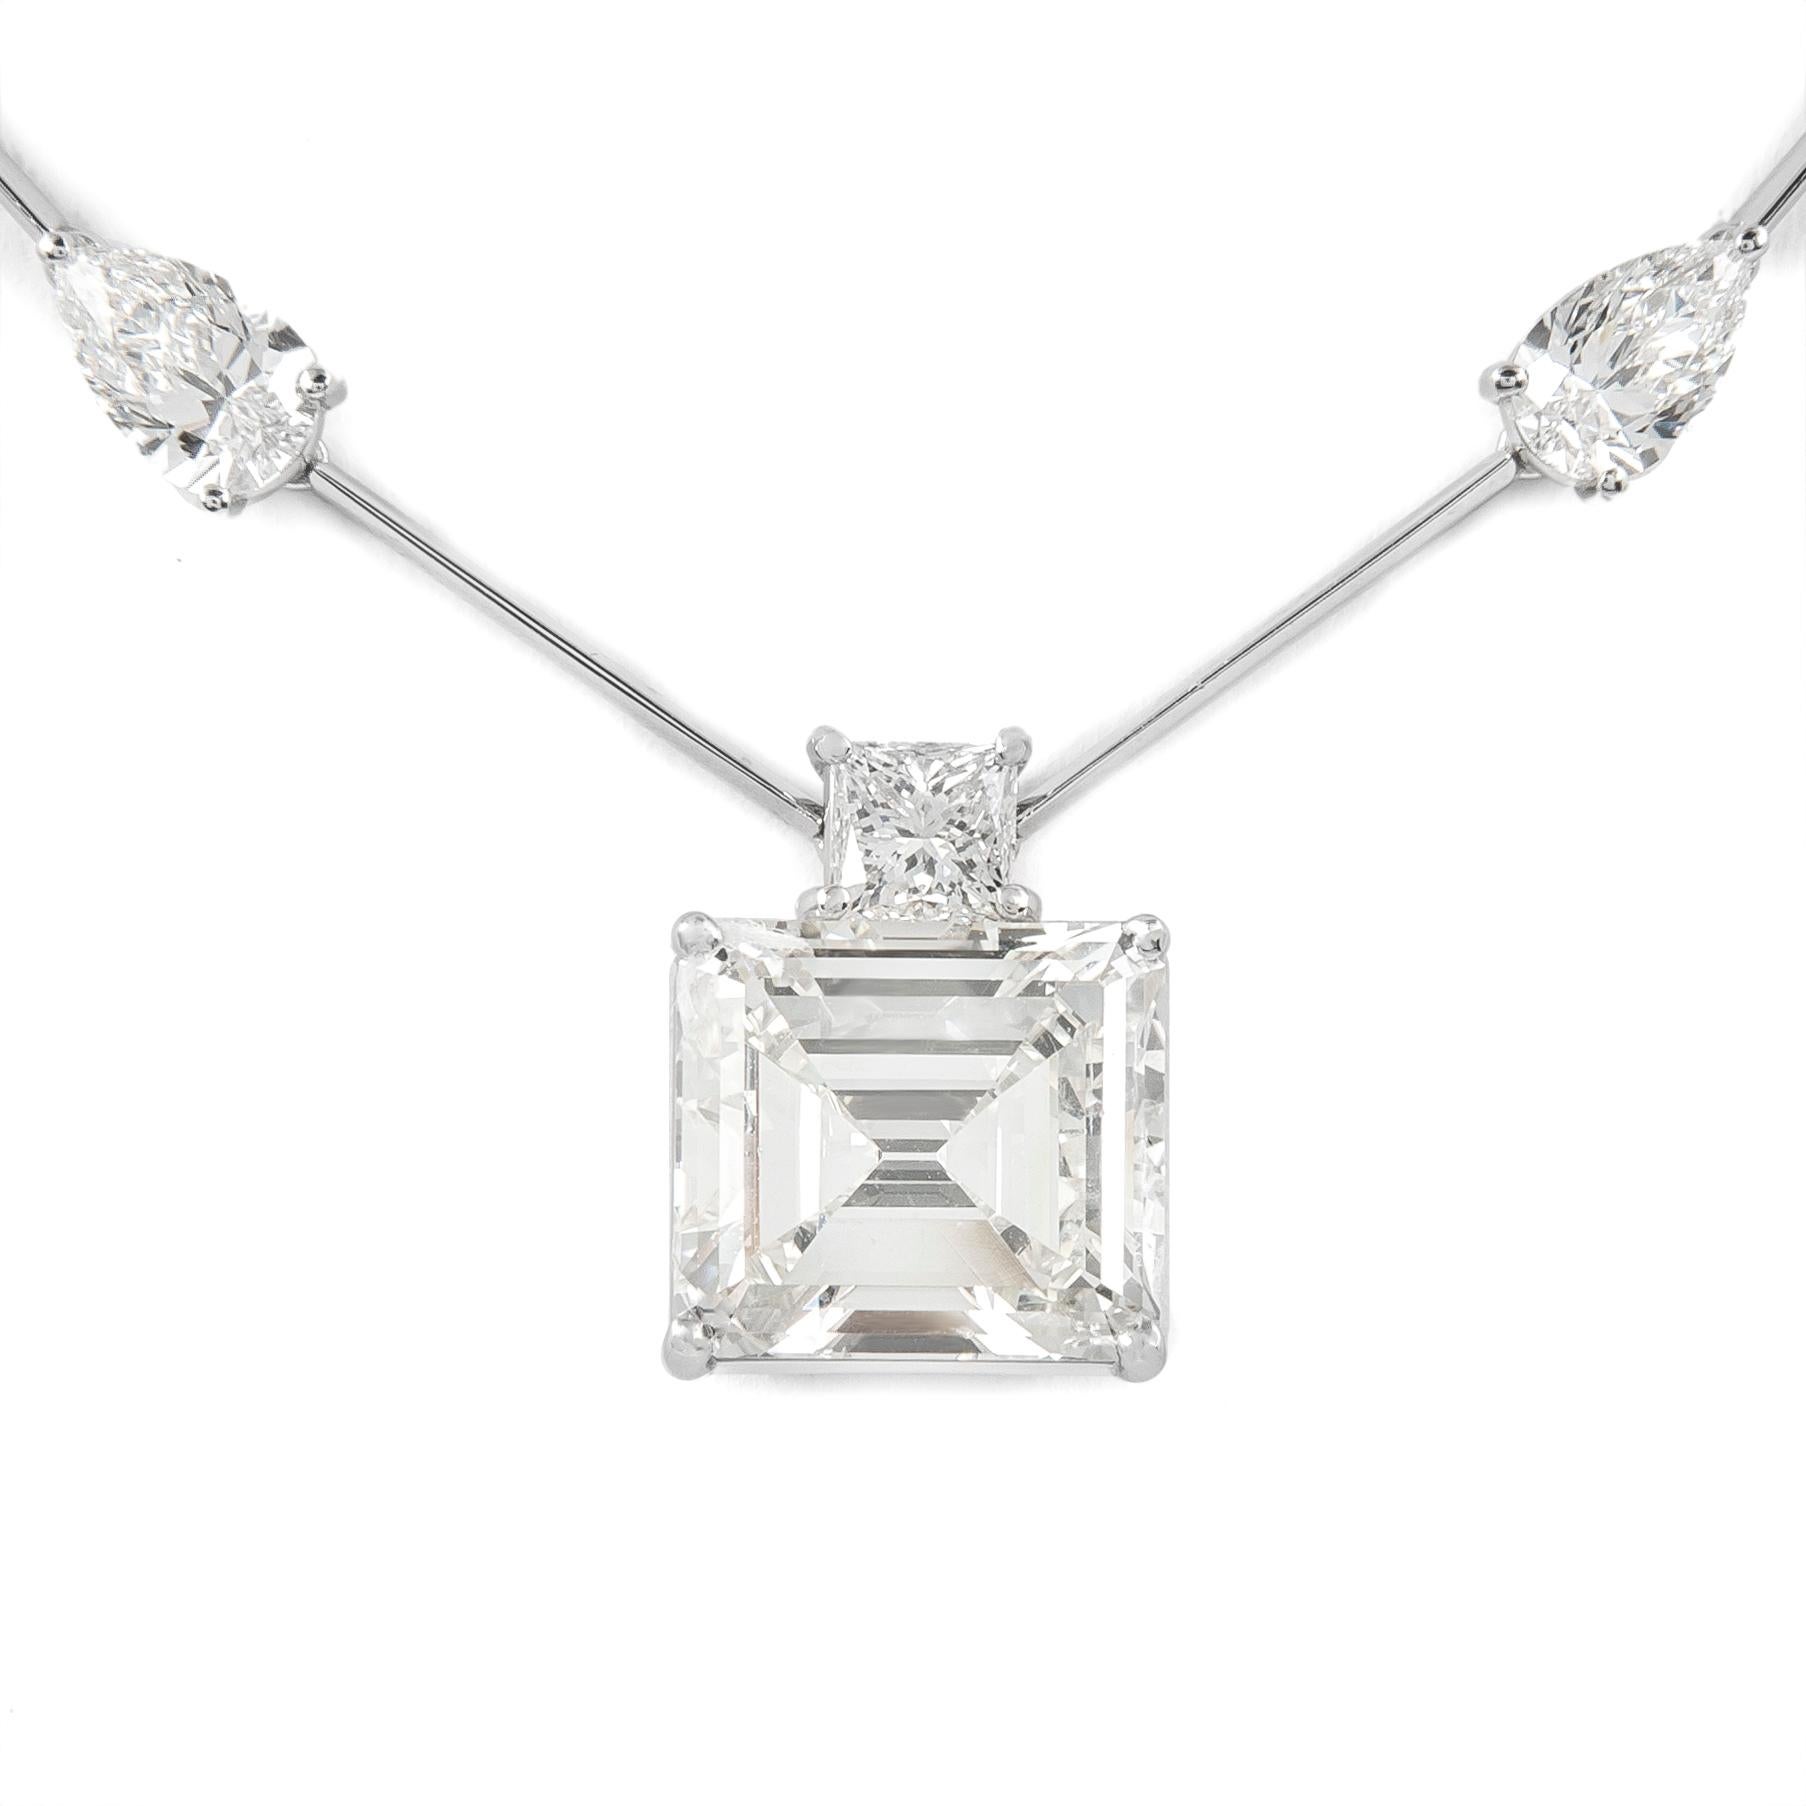 Exquisite and timeless round diamond tennis necklace with attached pear brilliant diamond. High jewelry by Alexander of Beverly Hills.
12.37 carats total diamond weight. 
5.54ct square emerald cut diamond, GIA certified K color and SI1 clarity.